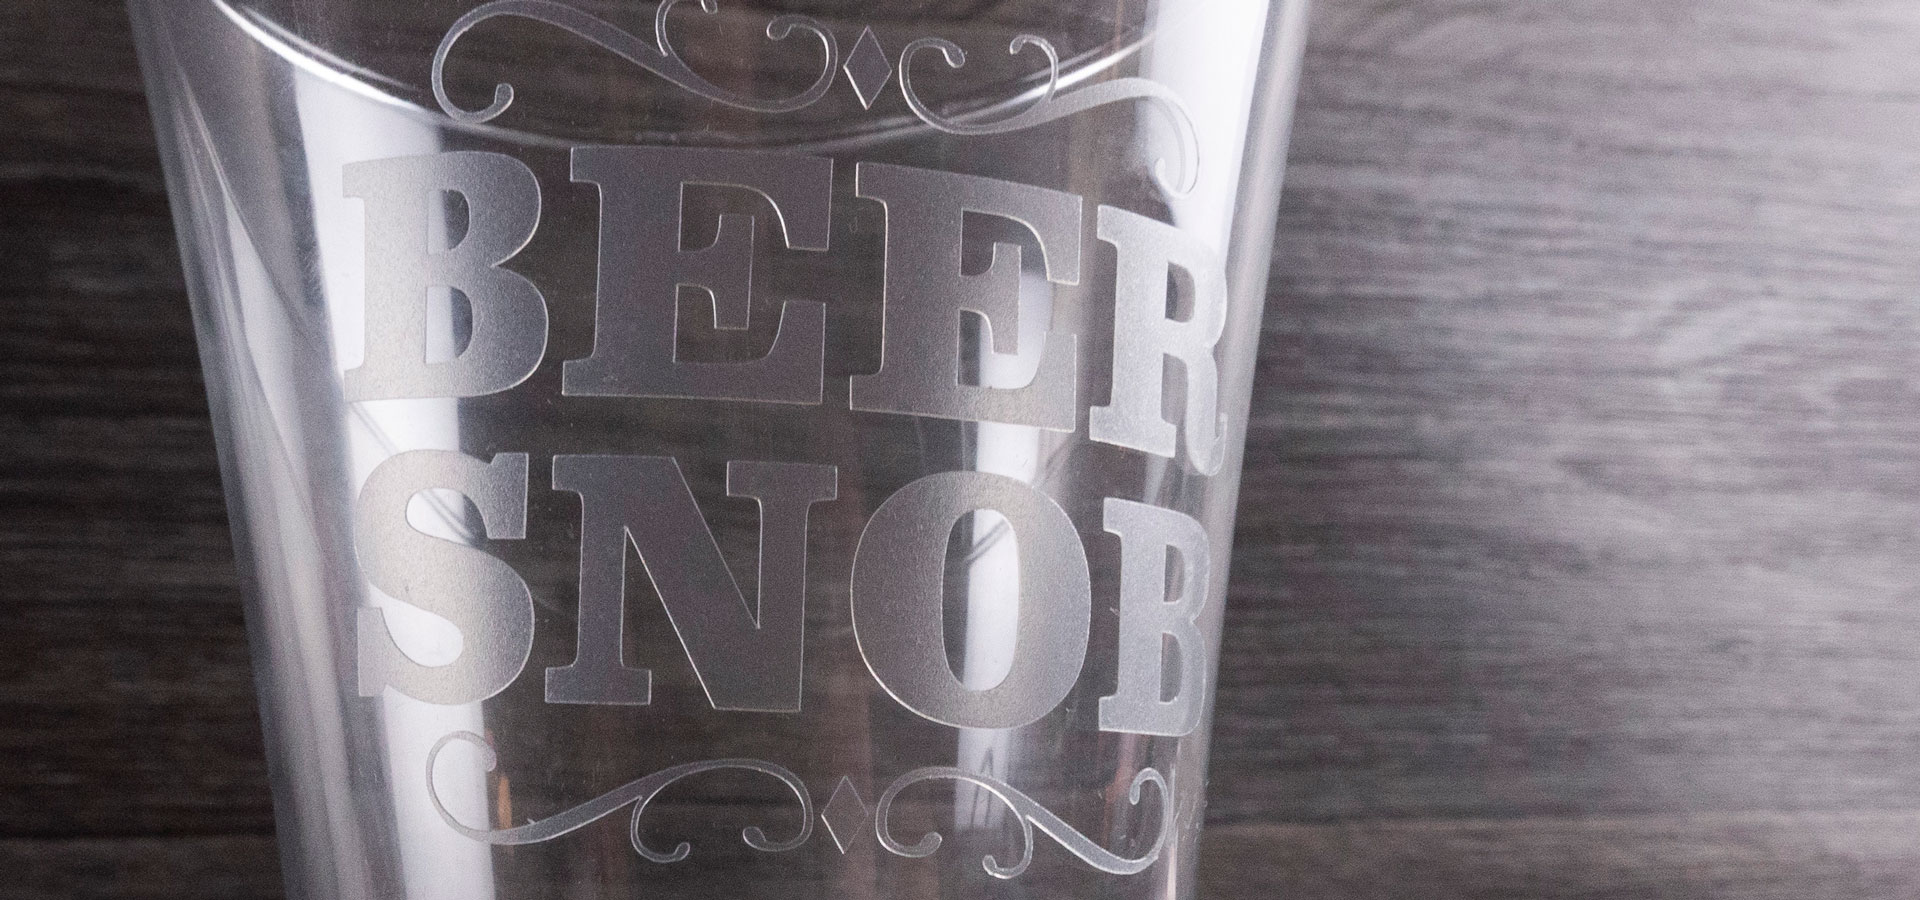 A beer glass reading "Beer Snob" made with White Etched